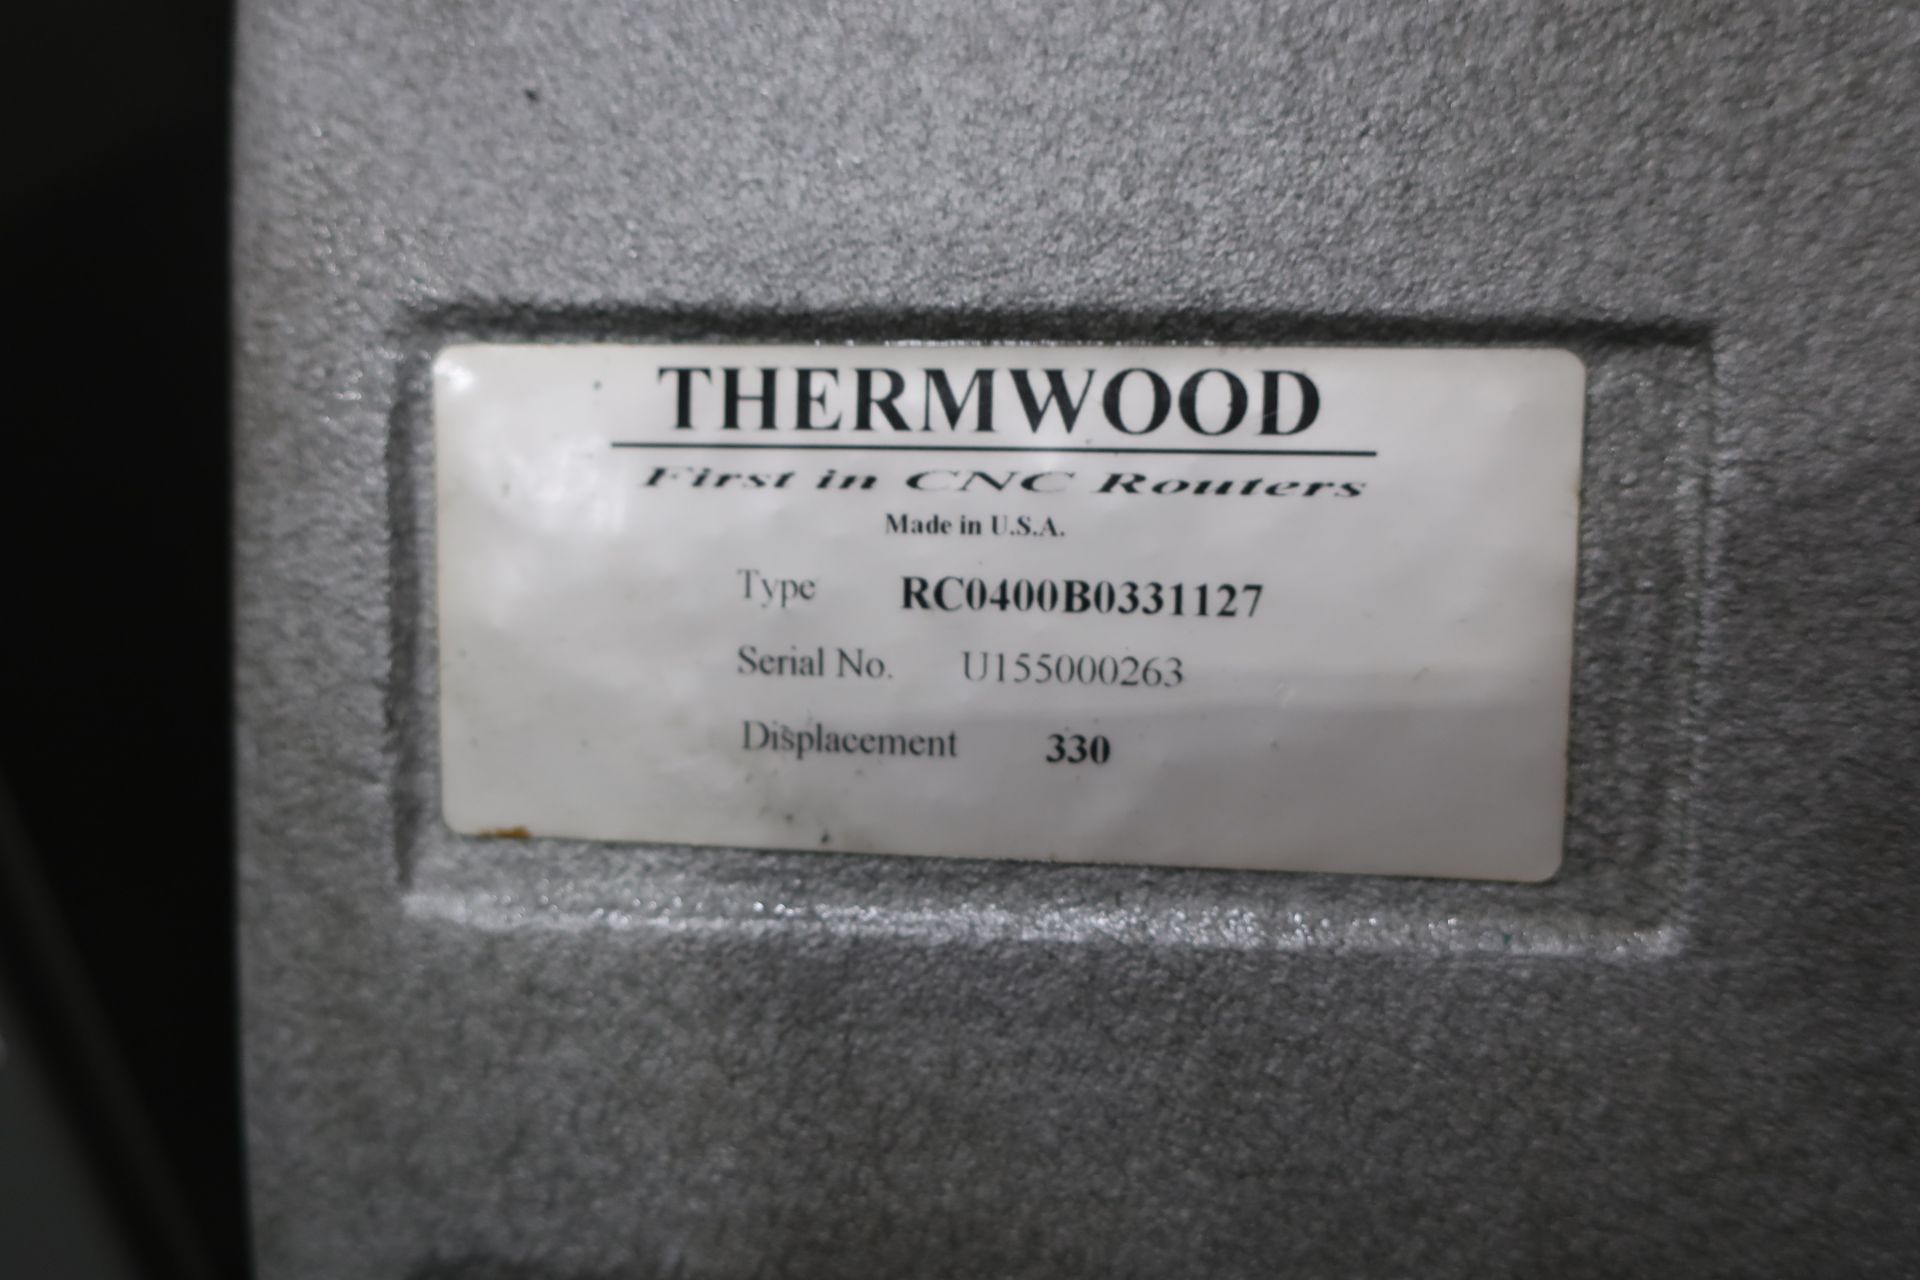 5'X5' DUAL SPINDLE THERMWOOD M45-55 CNC ROUTER, S/N CS454670116, NEW 2016 - Image 10 of 10